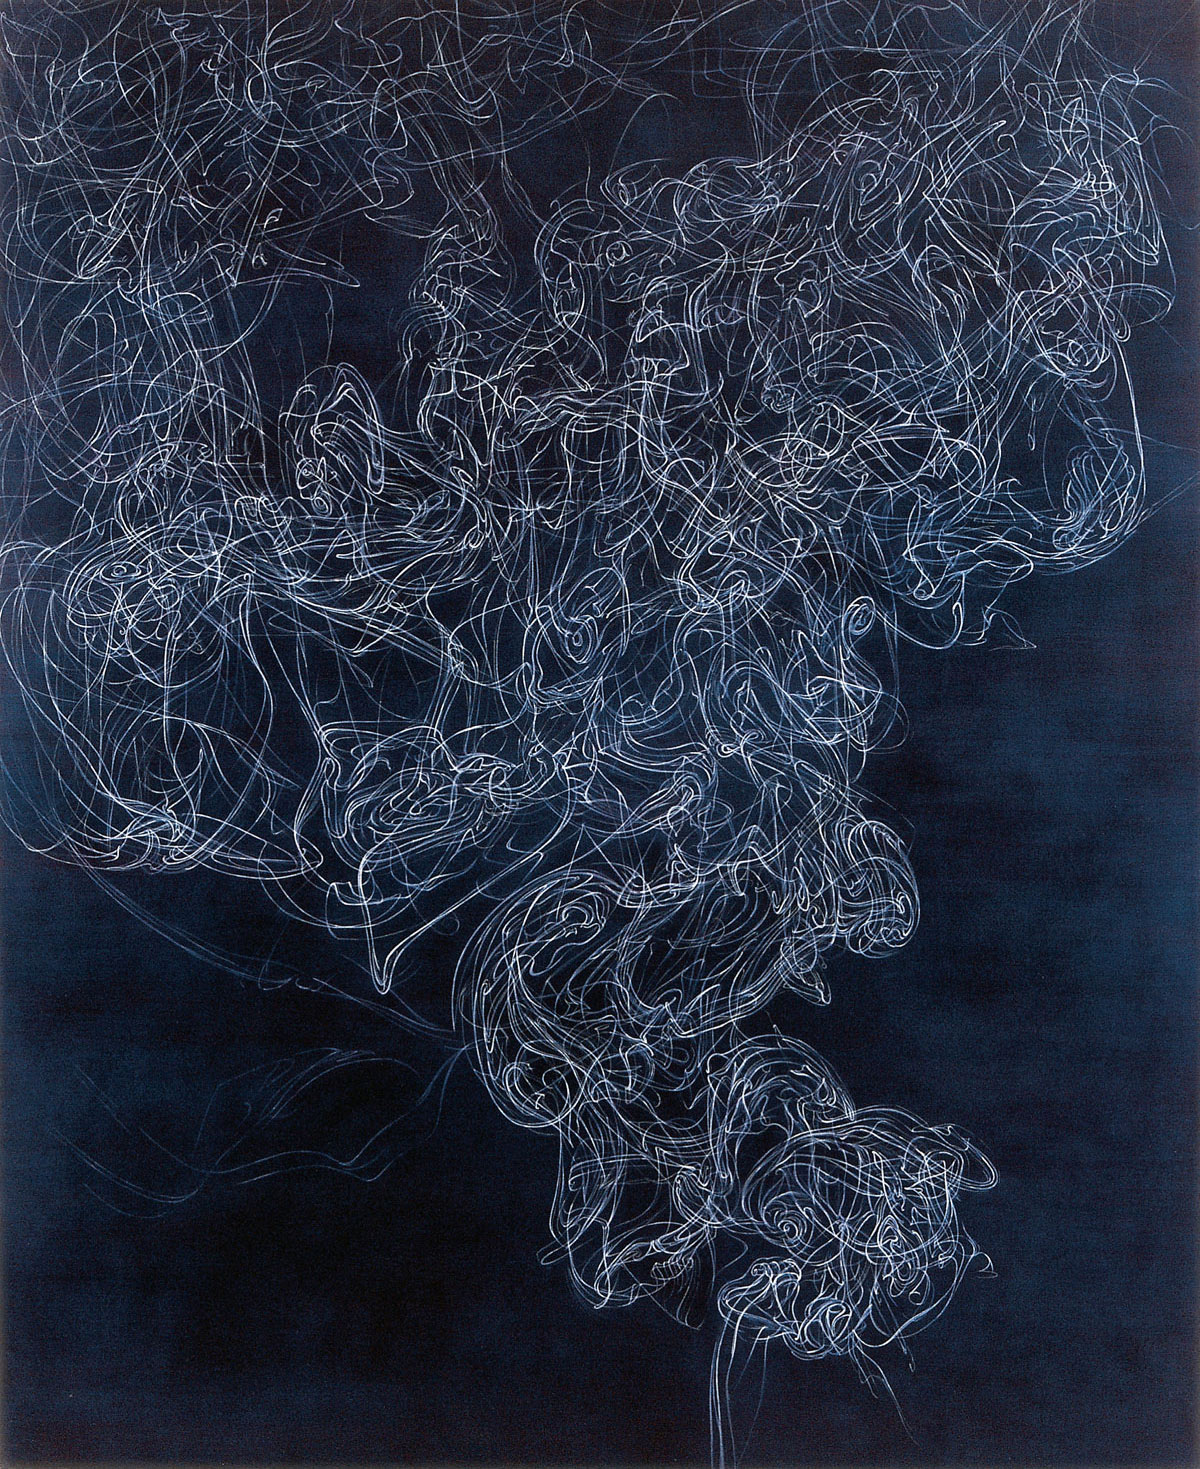 A 2001 painting by Karen Arm entitled “Untitled (Incense #3).”